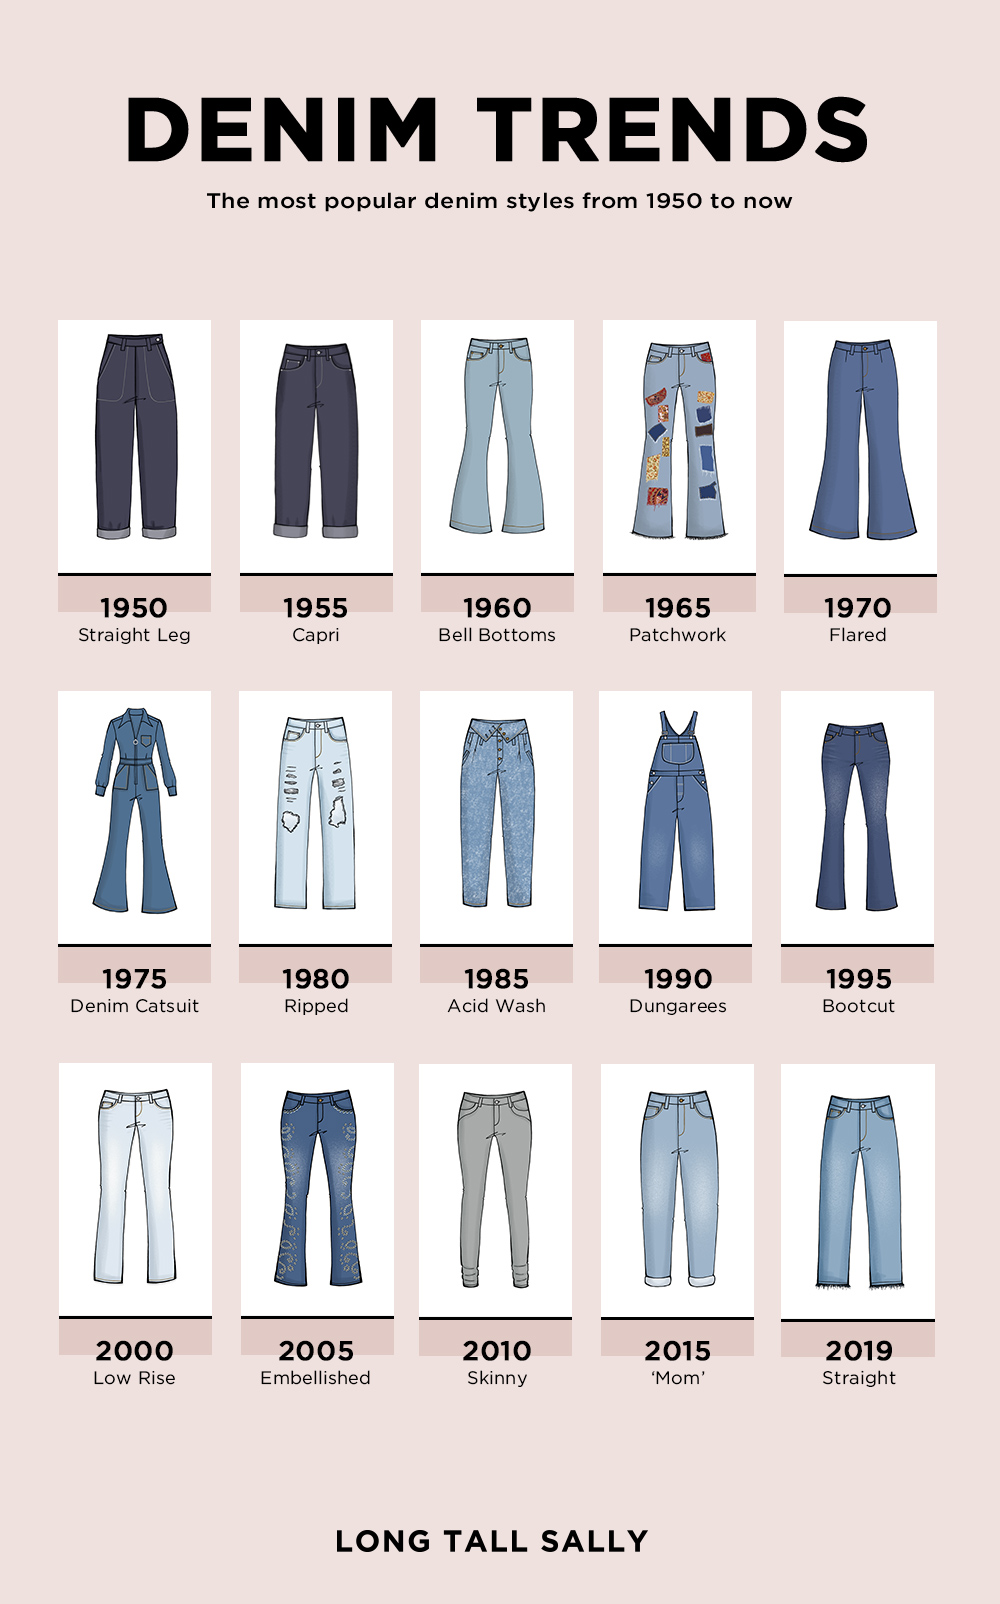 Jeans: How to style denim for modern times